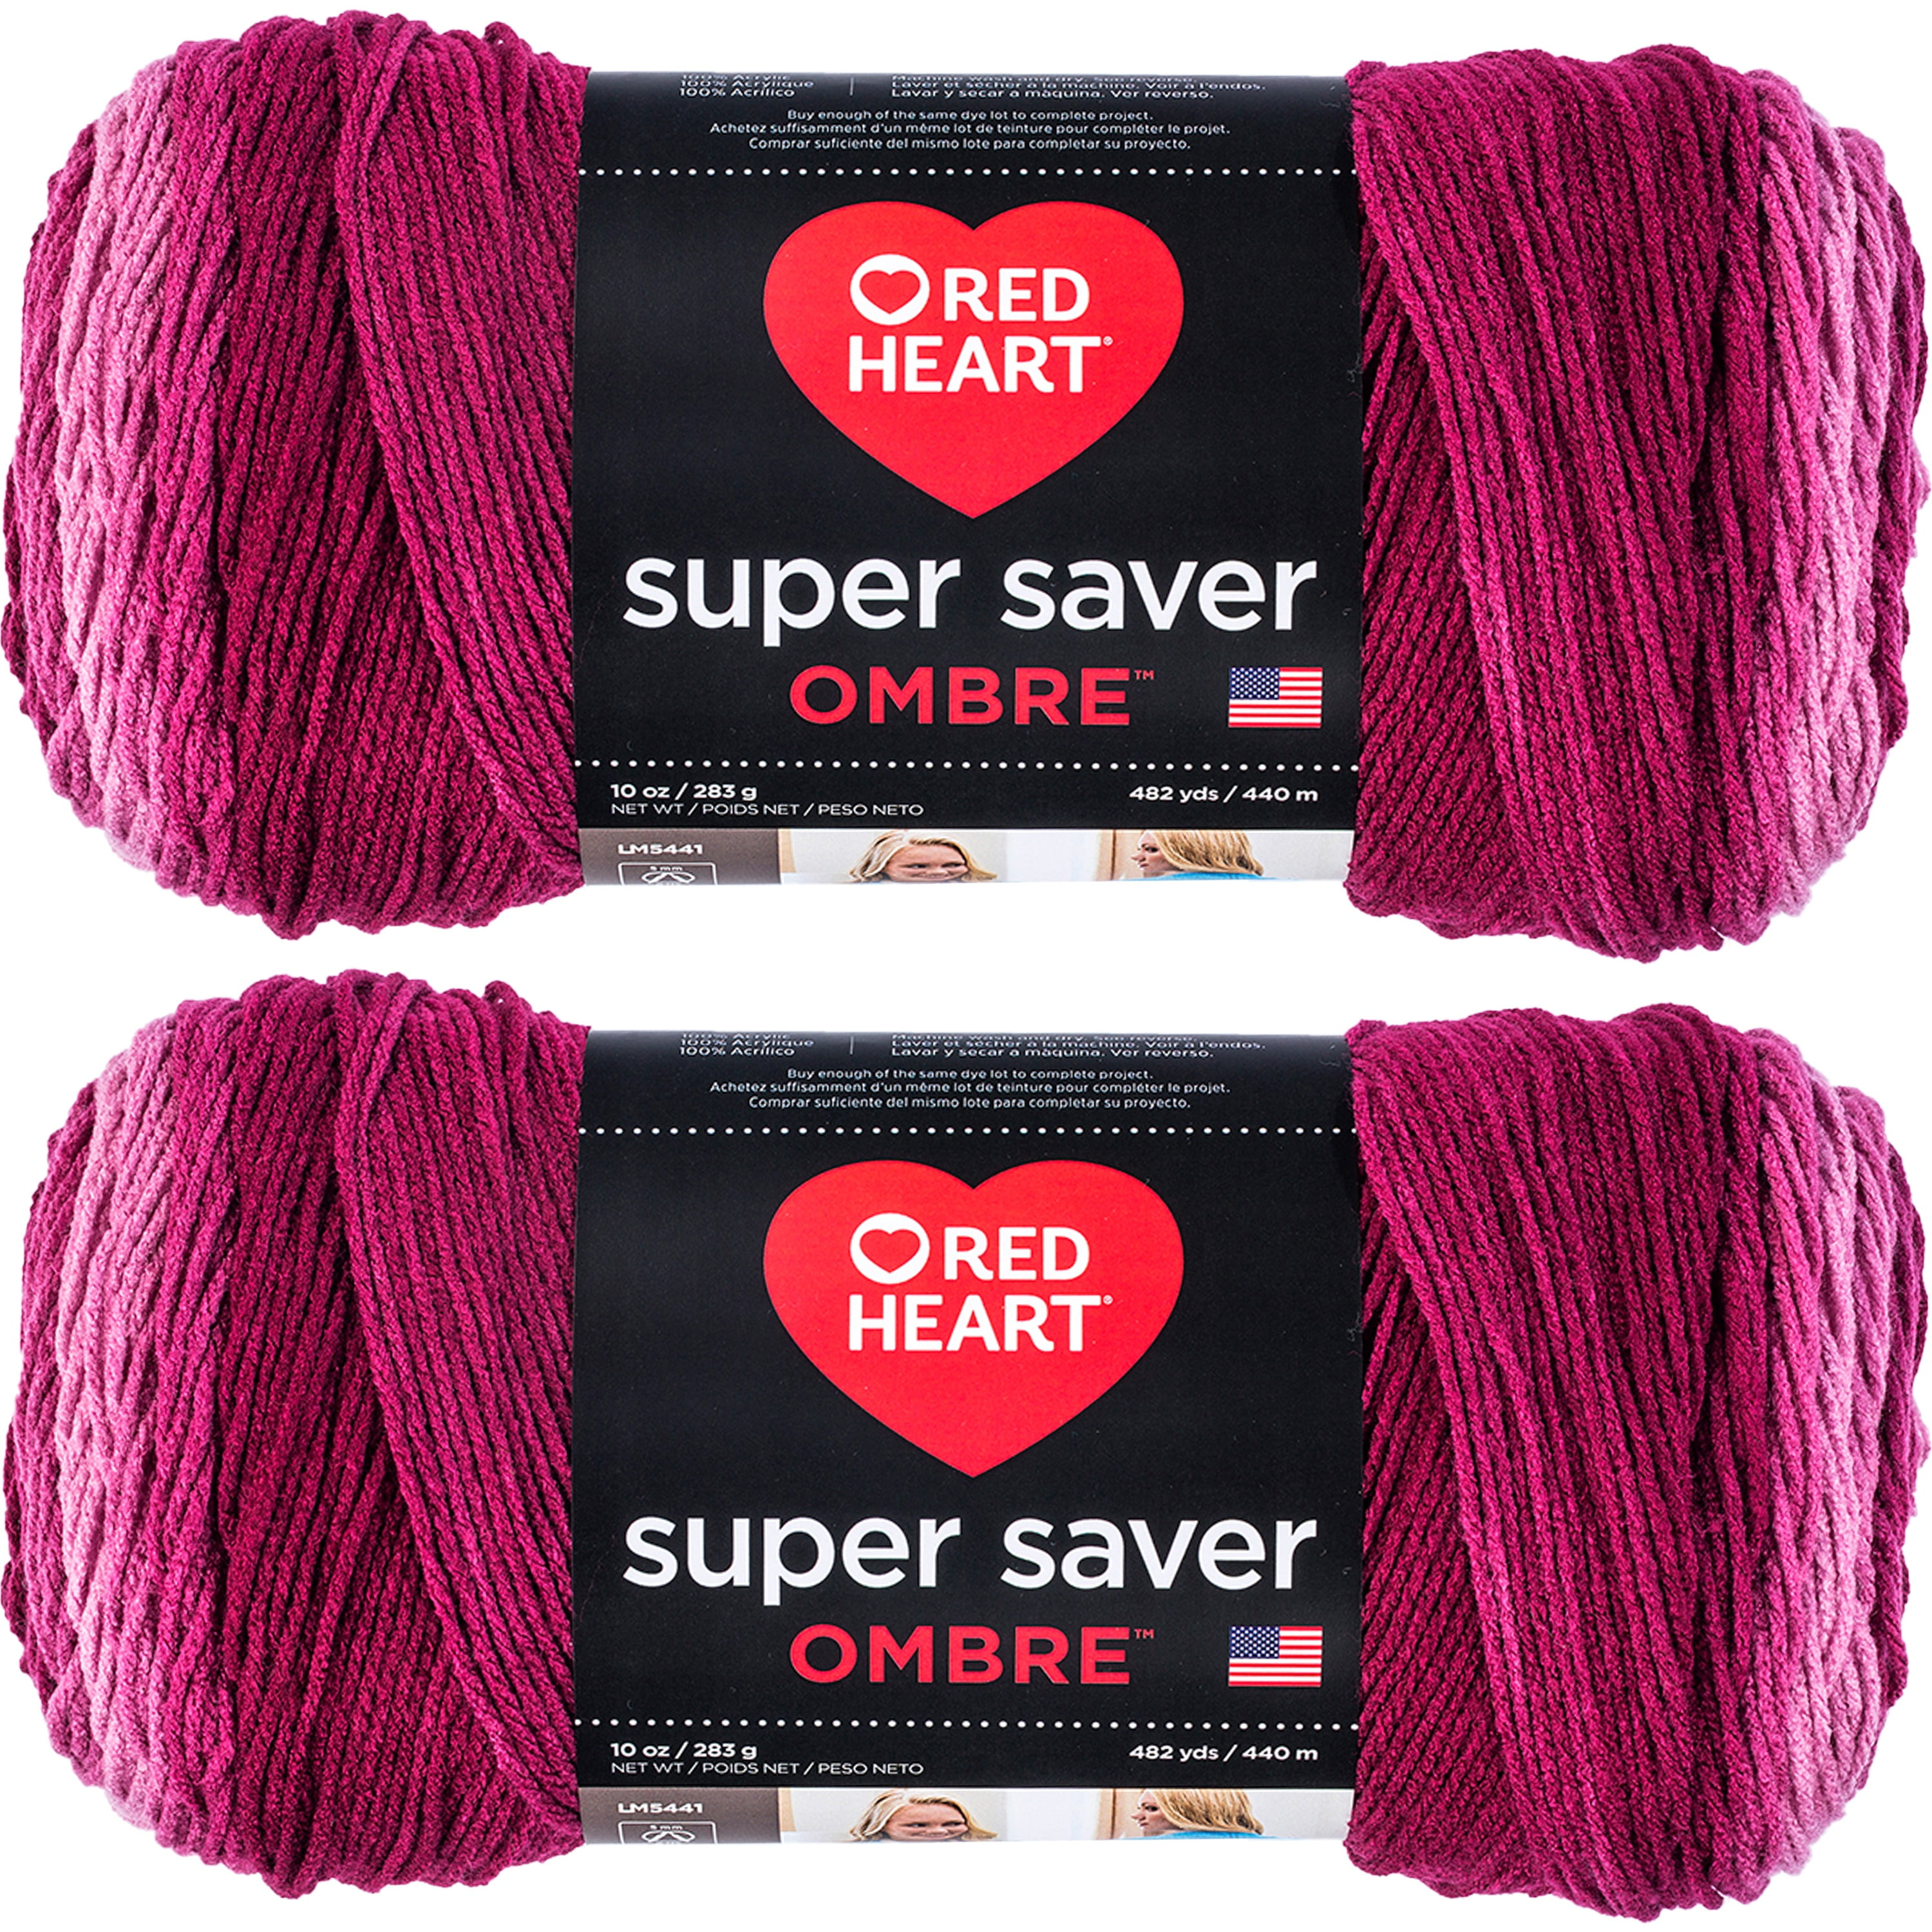 Red Heart Super Saver Ombre Yarn-Anemone, Multipack Of 2 